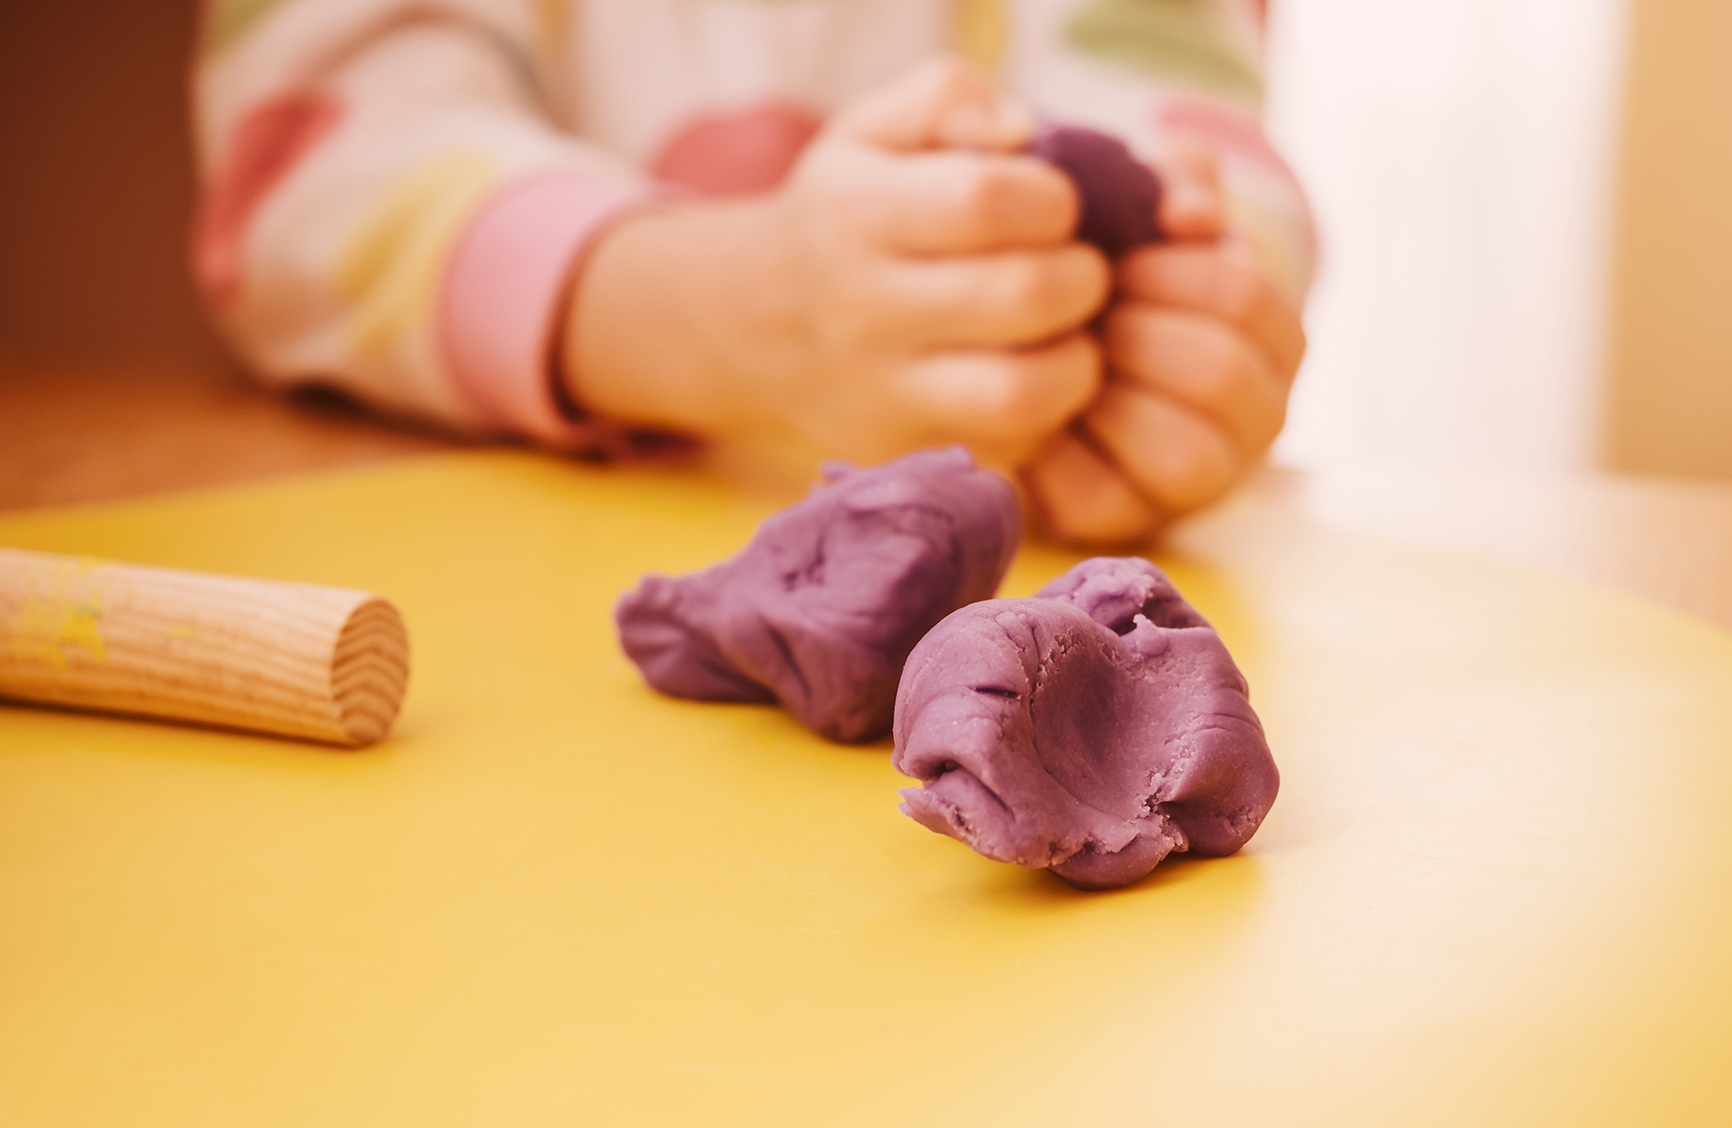 Child's hands kneading modelling clay